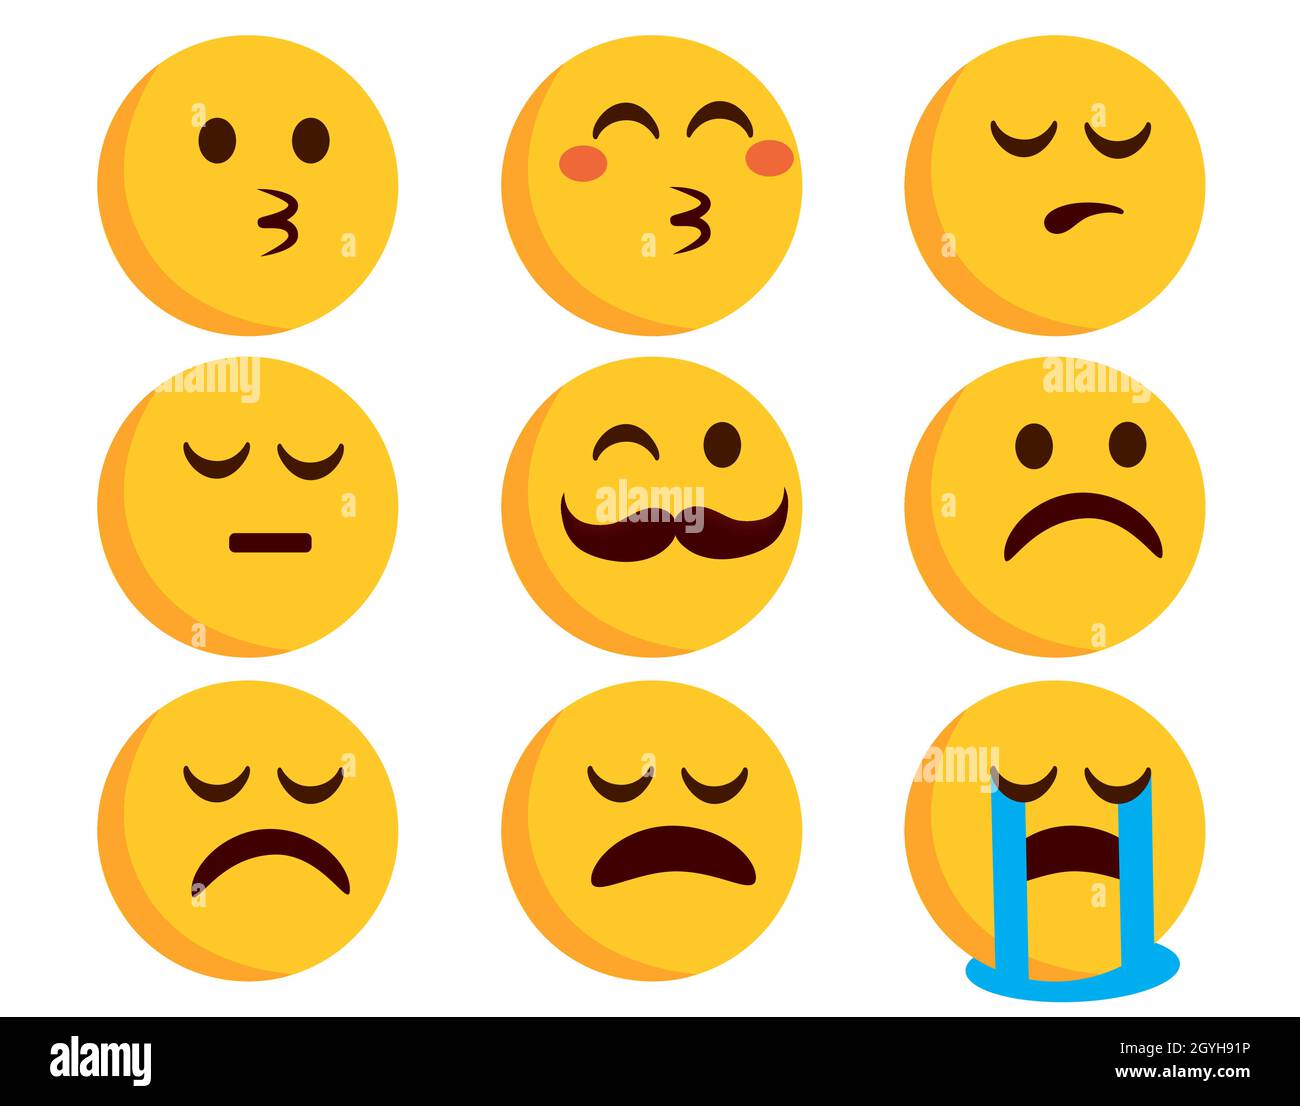 Smileys flat emoticon vector set. Emoticons smiley characters in kissing, crying and sad mood expressions isolated in white background for emoji. Stock Vector